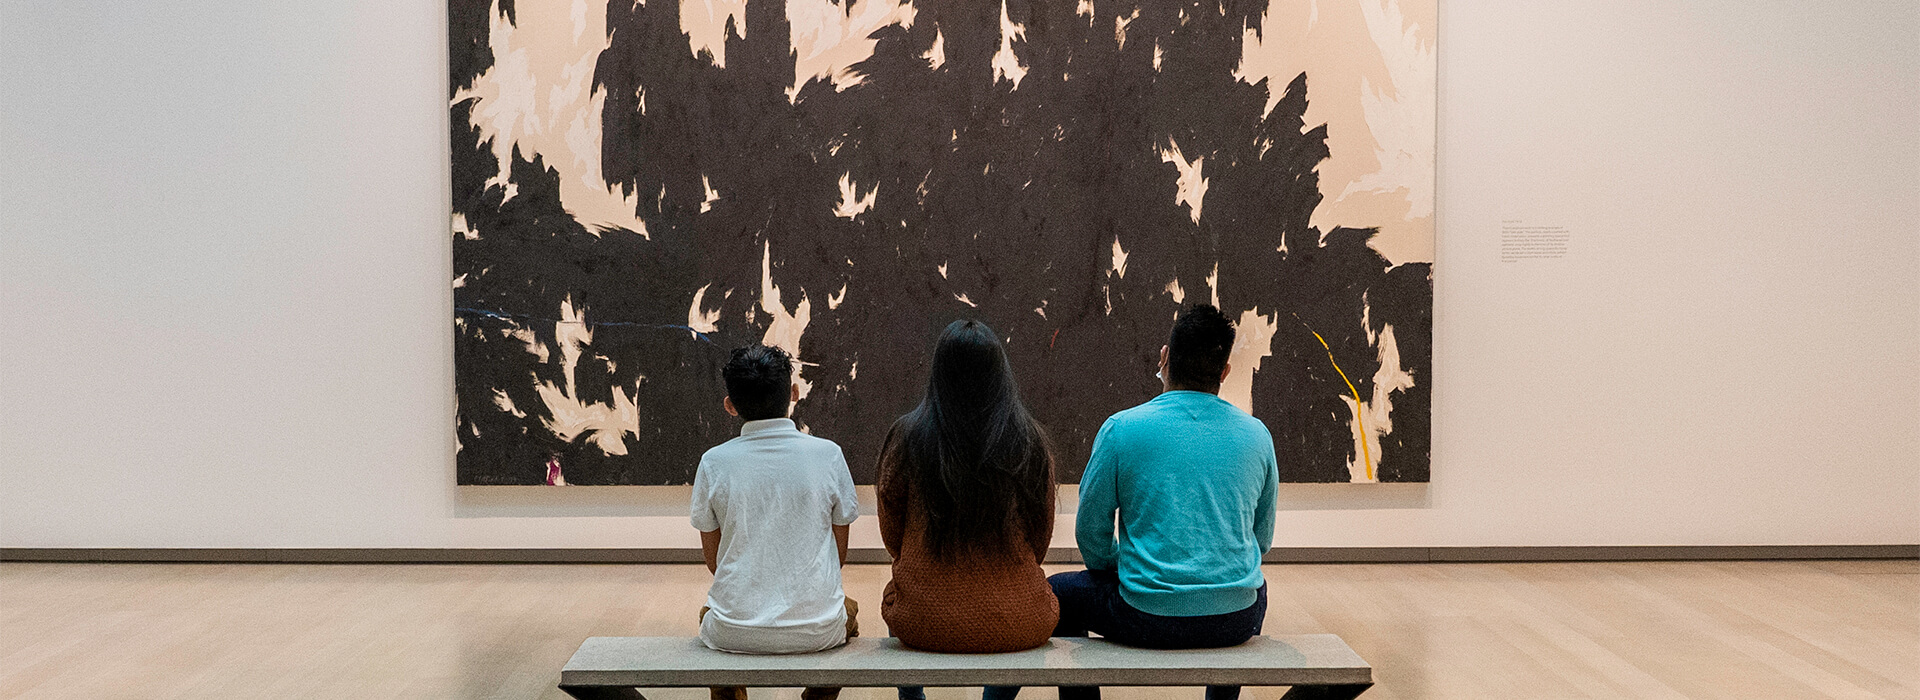 A family sits on a bench and looks at a large black and white abstract painting